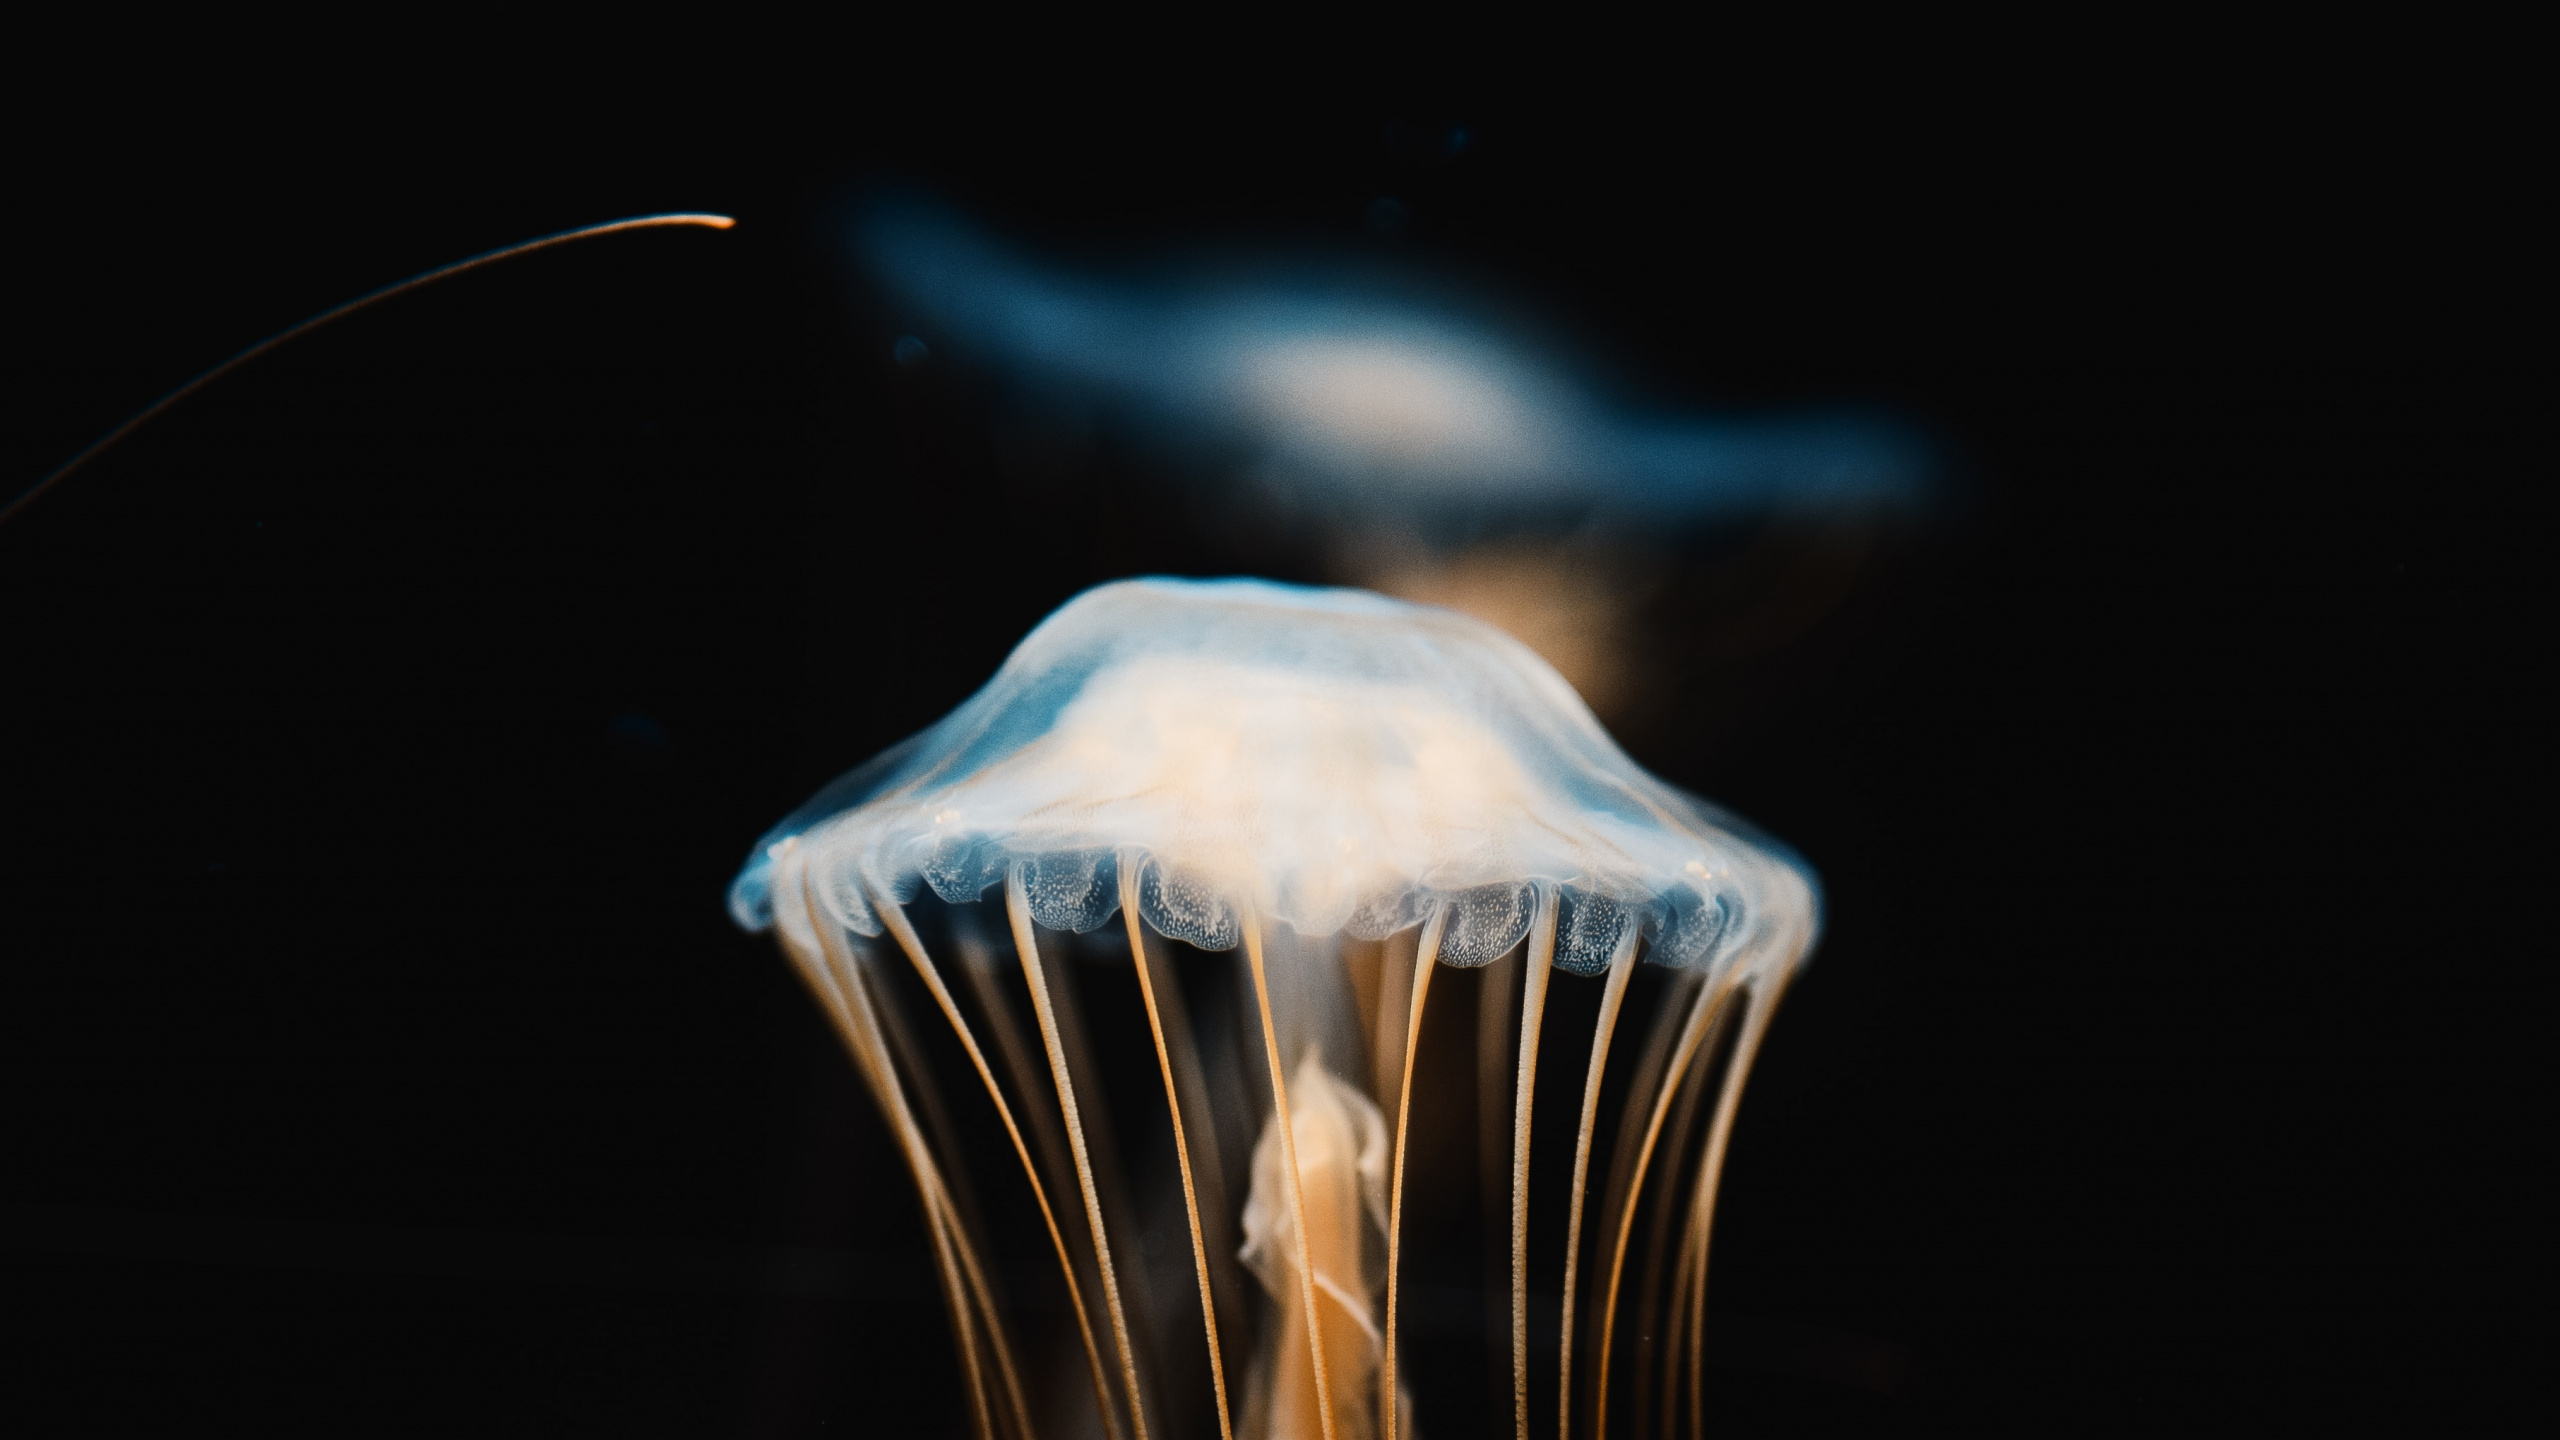 Blue and White Jellyfish in Dark Room. Wallpaper in 2560x1440 Resolution